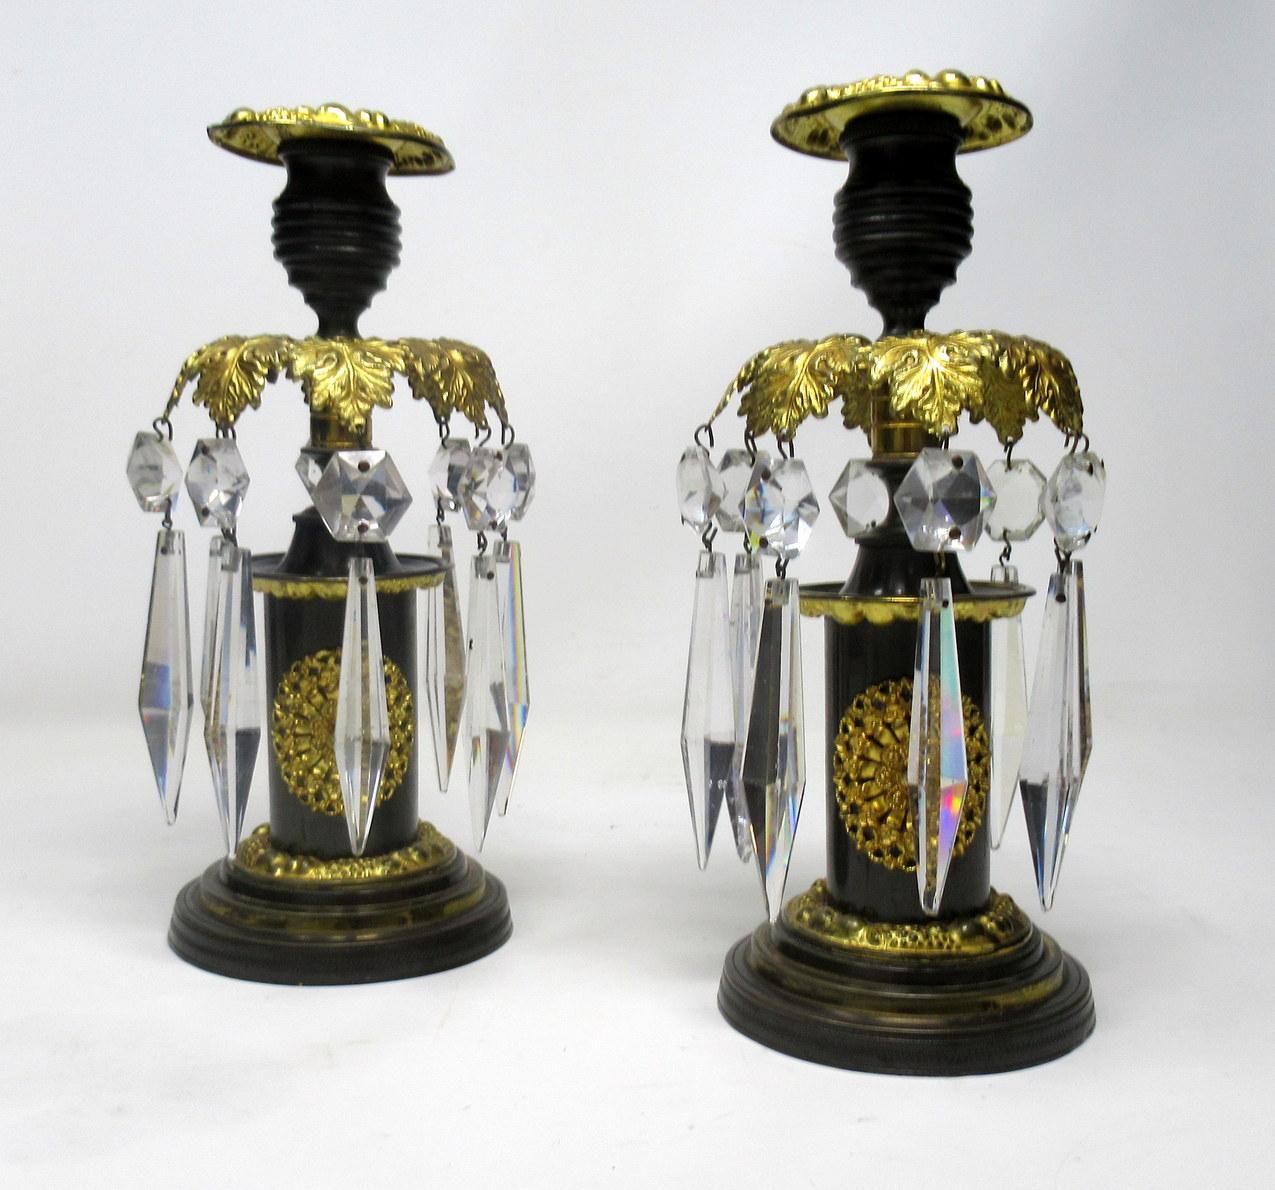 A stylish pair of English Regency Period patinated bronze and Ormolu weighted table or mantle single light Lustres, first quarter of the 19th century.

Each with bronze reeded sconces above Acanthus leaf canopies decorated with eight original hand